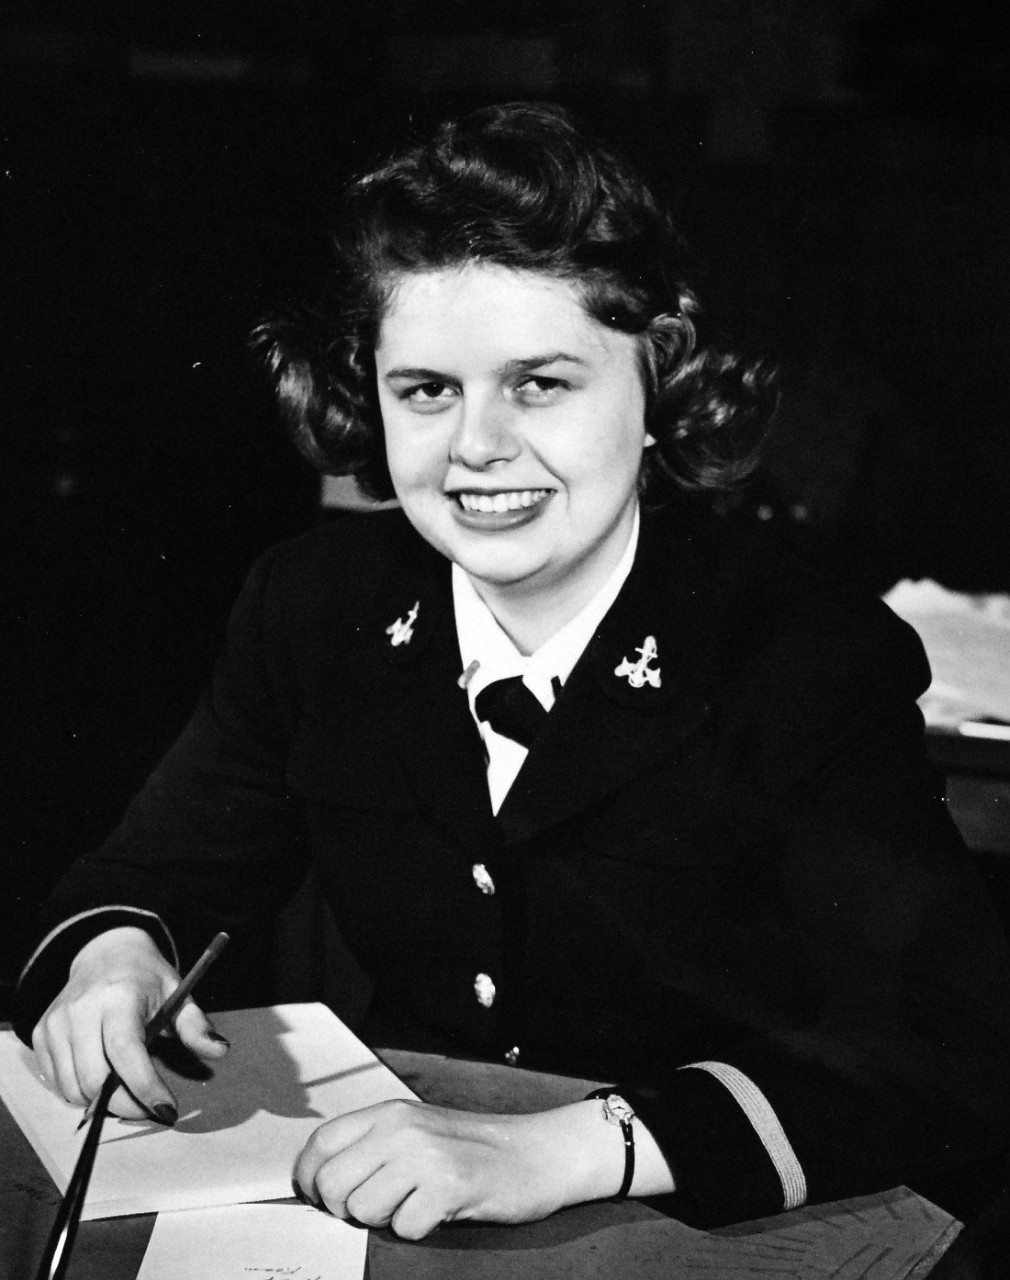 80-G-43519:  Ensign Betty J. Woodson, USNR.  Service Dress Blue Uniform.  Photograph released November 8, 1943.  Official U.S. Navy photograph, now in the collections of the National Archives.  